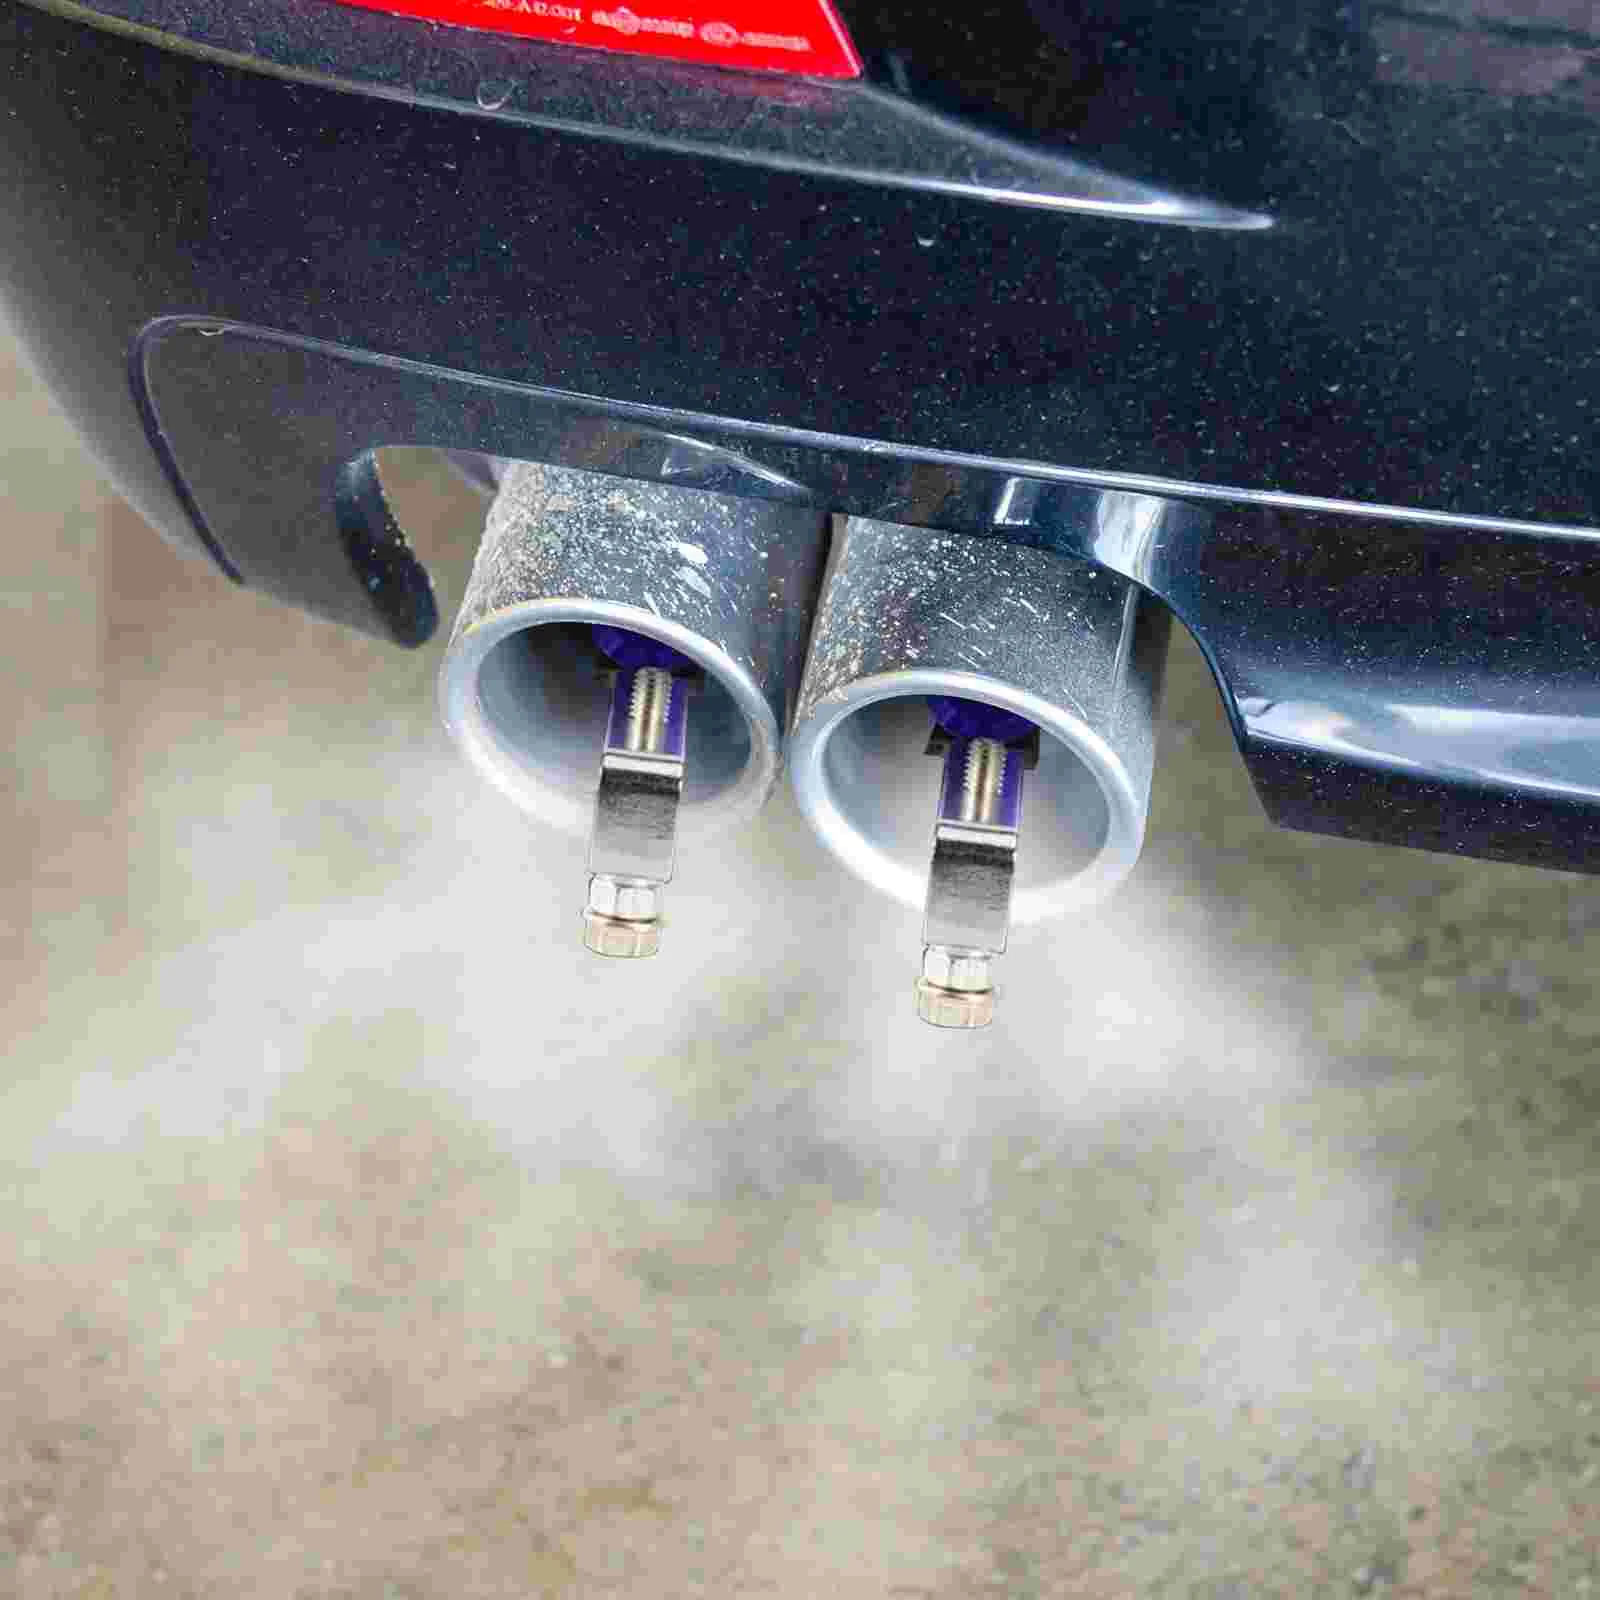 

Aluminum Alloy Car Turbo Sound Exhaust Universal Sound Whistle Tailpipe Blow-Off Valve Simulator - Size S (Silver)